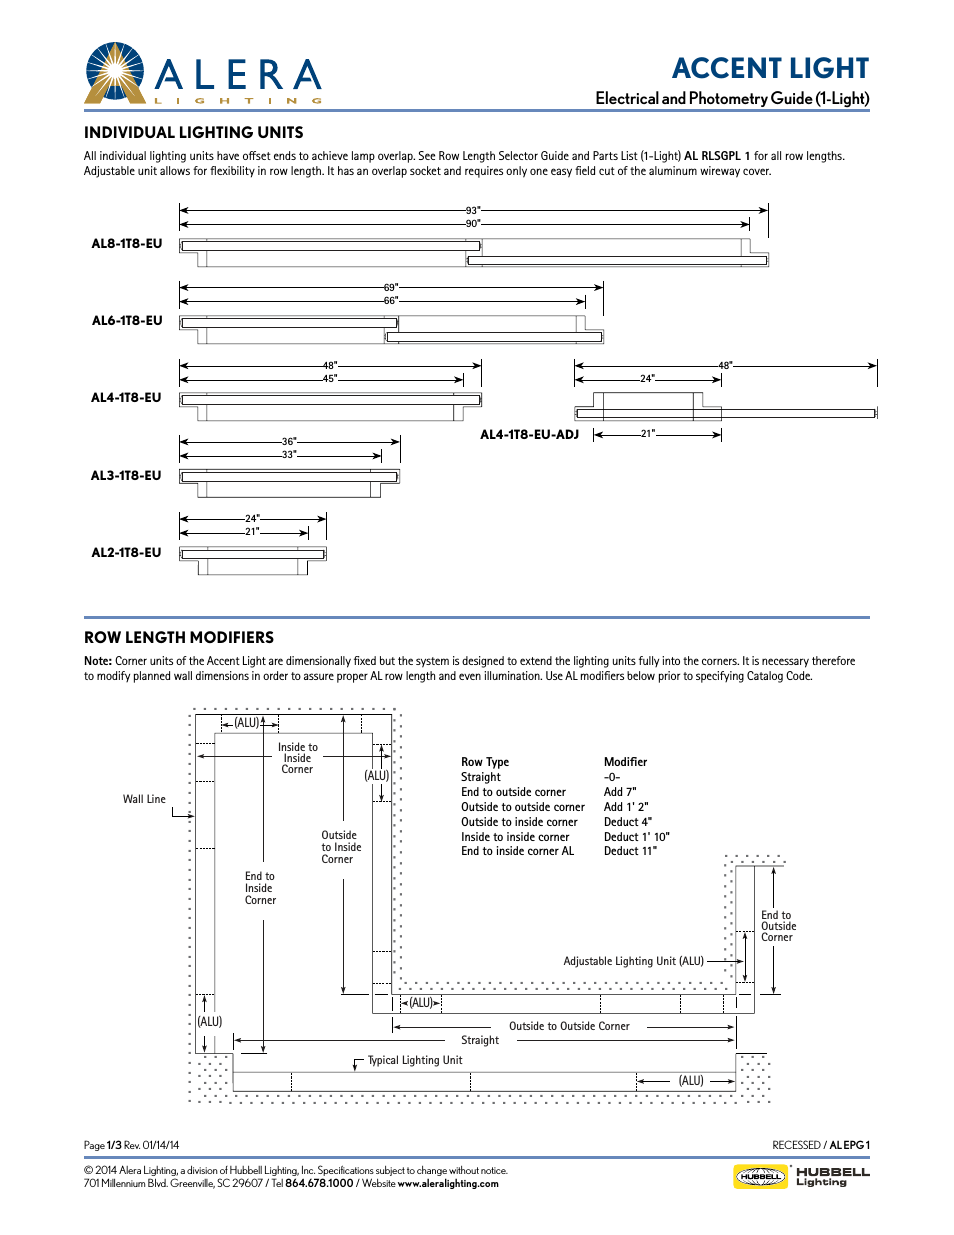 AL 1 Light - Electrical and Photometry Guide (Page 1)